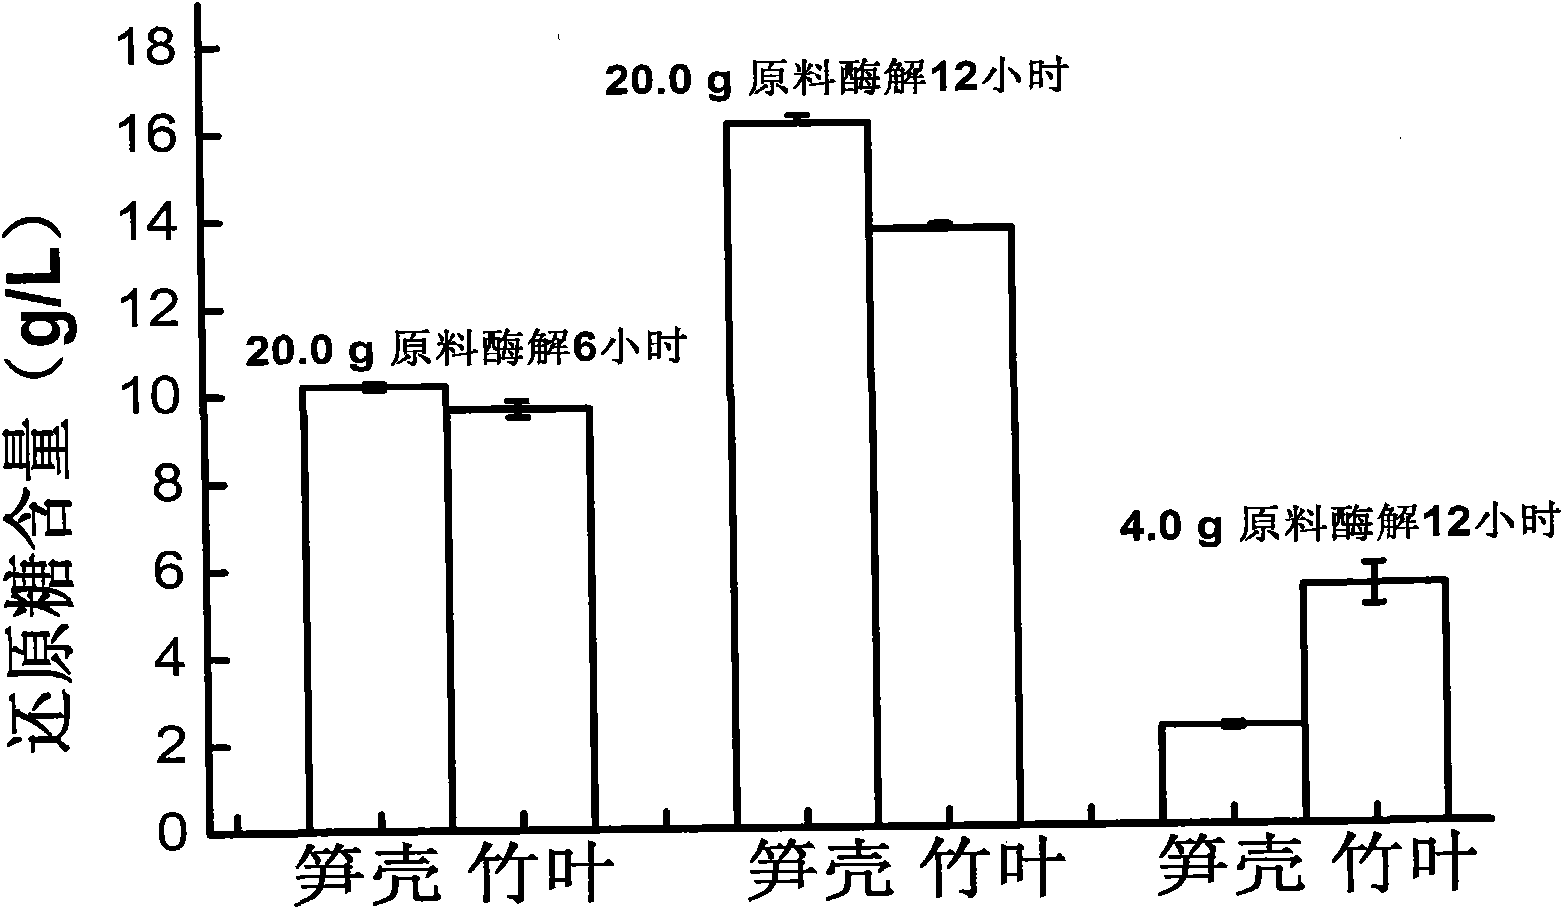 Process for producing fuel ethanol by utilizing bamboo biomass waste